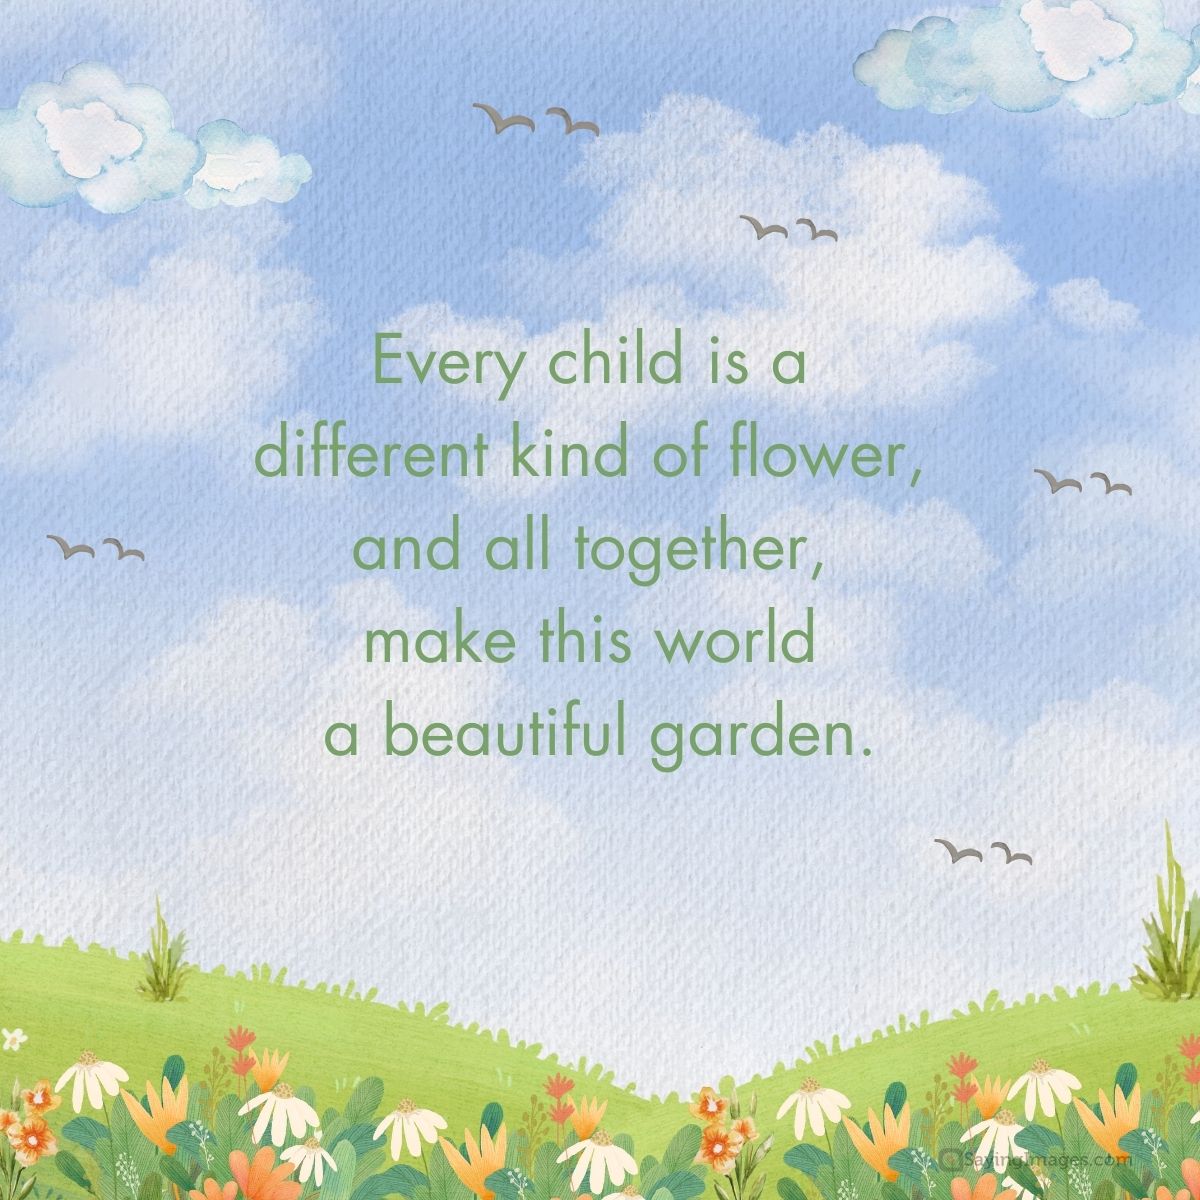 Every child is a different kind of flower